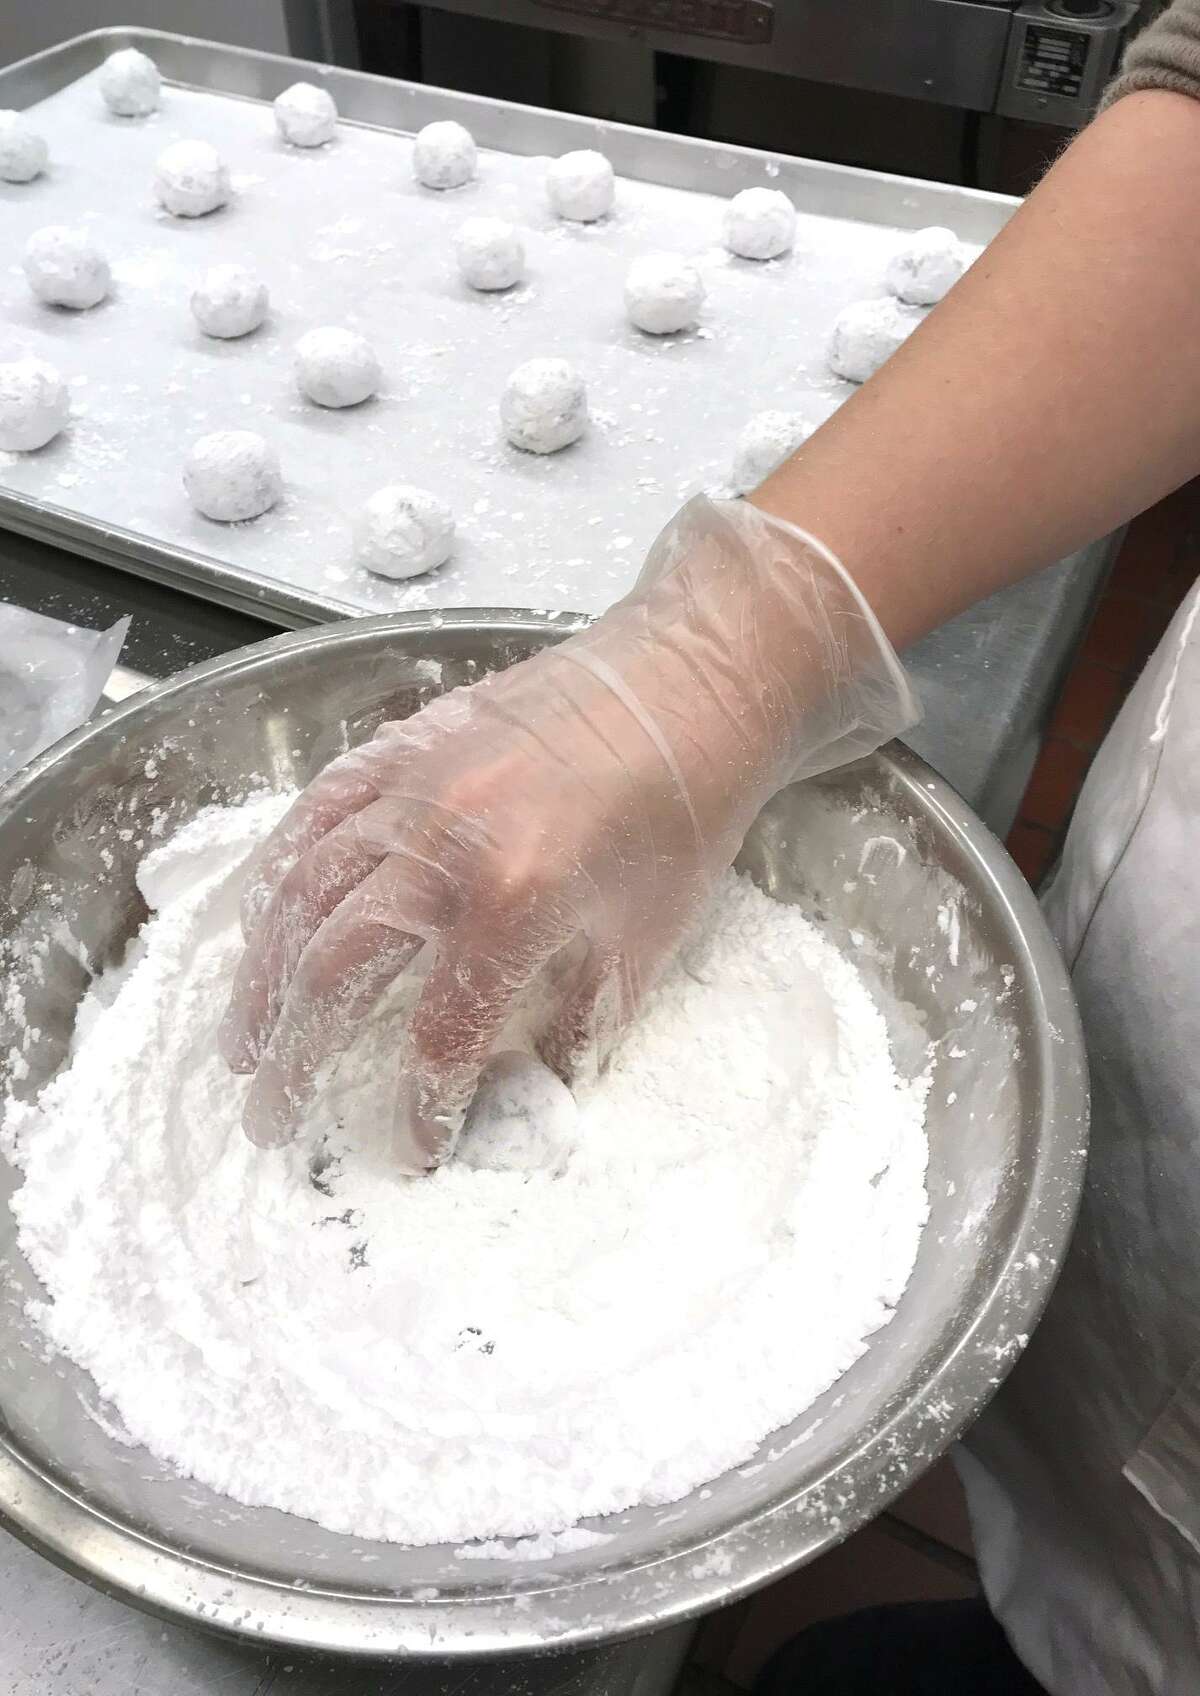 A worker at Crumb Together Bakery in Norwalk rolls a chocolate crinkle cookie ball in powdered sugar before baking.